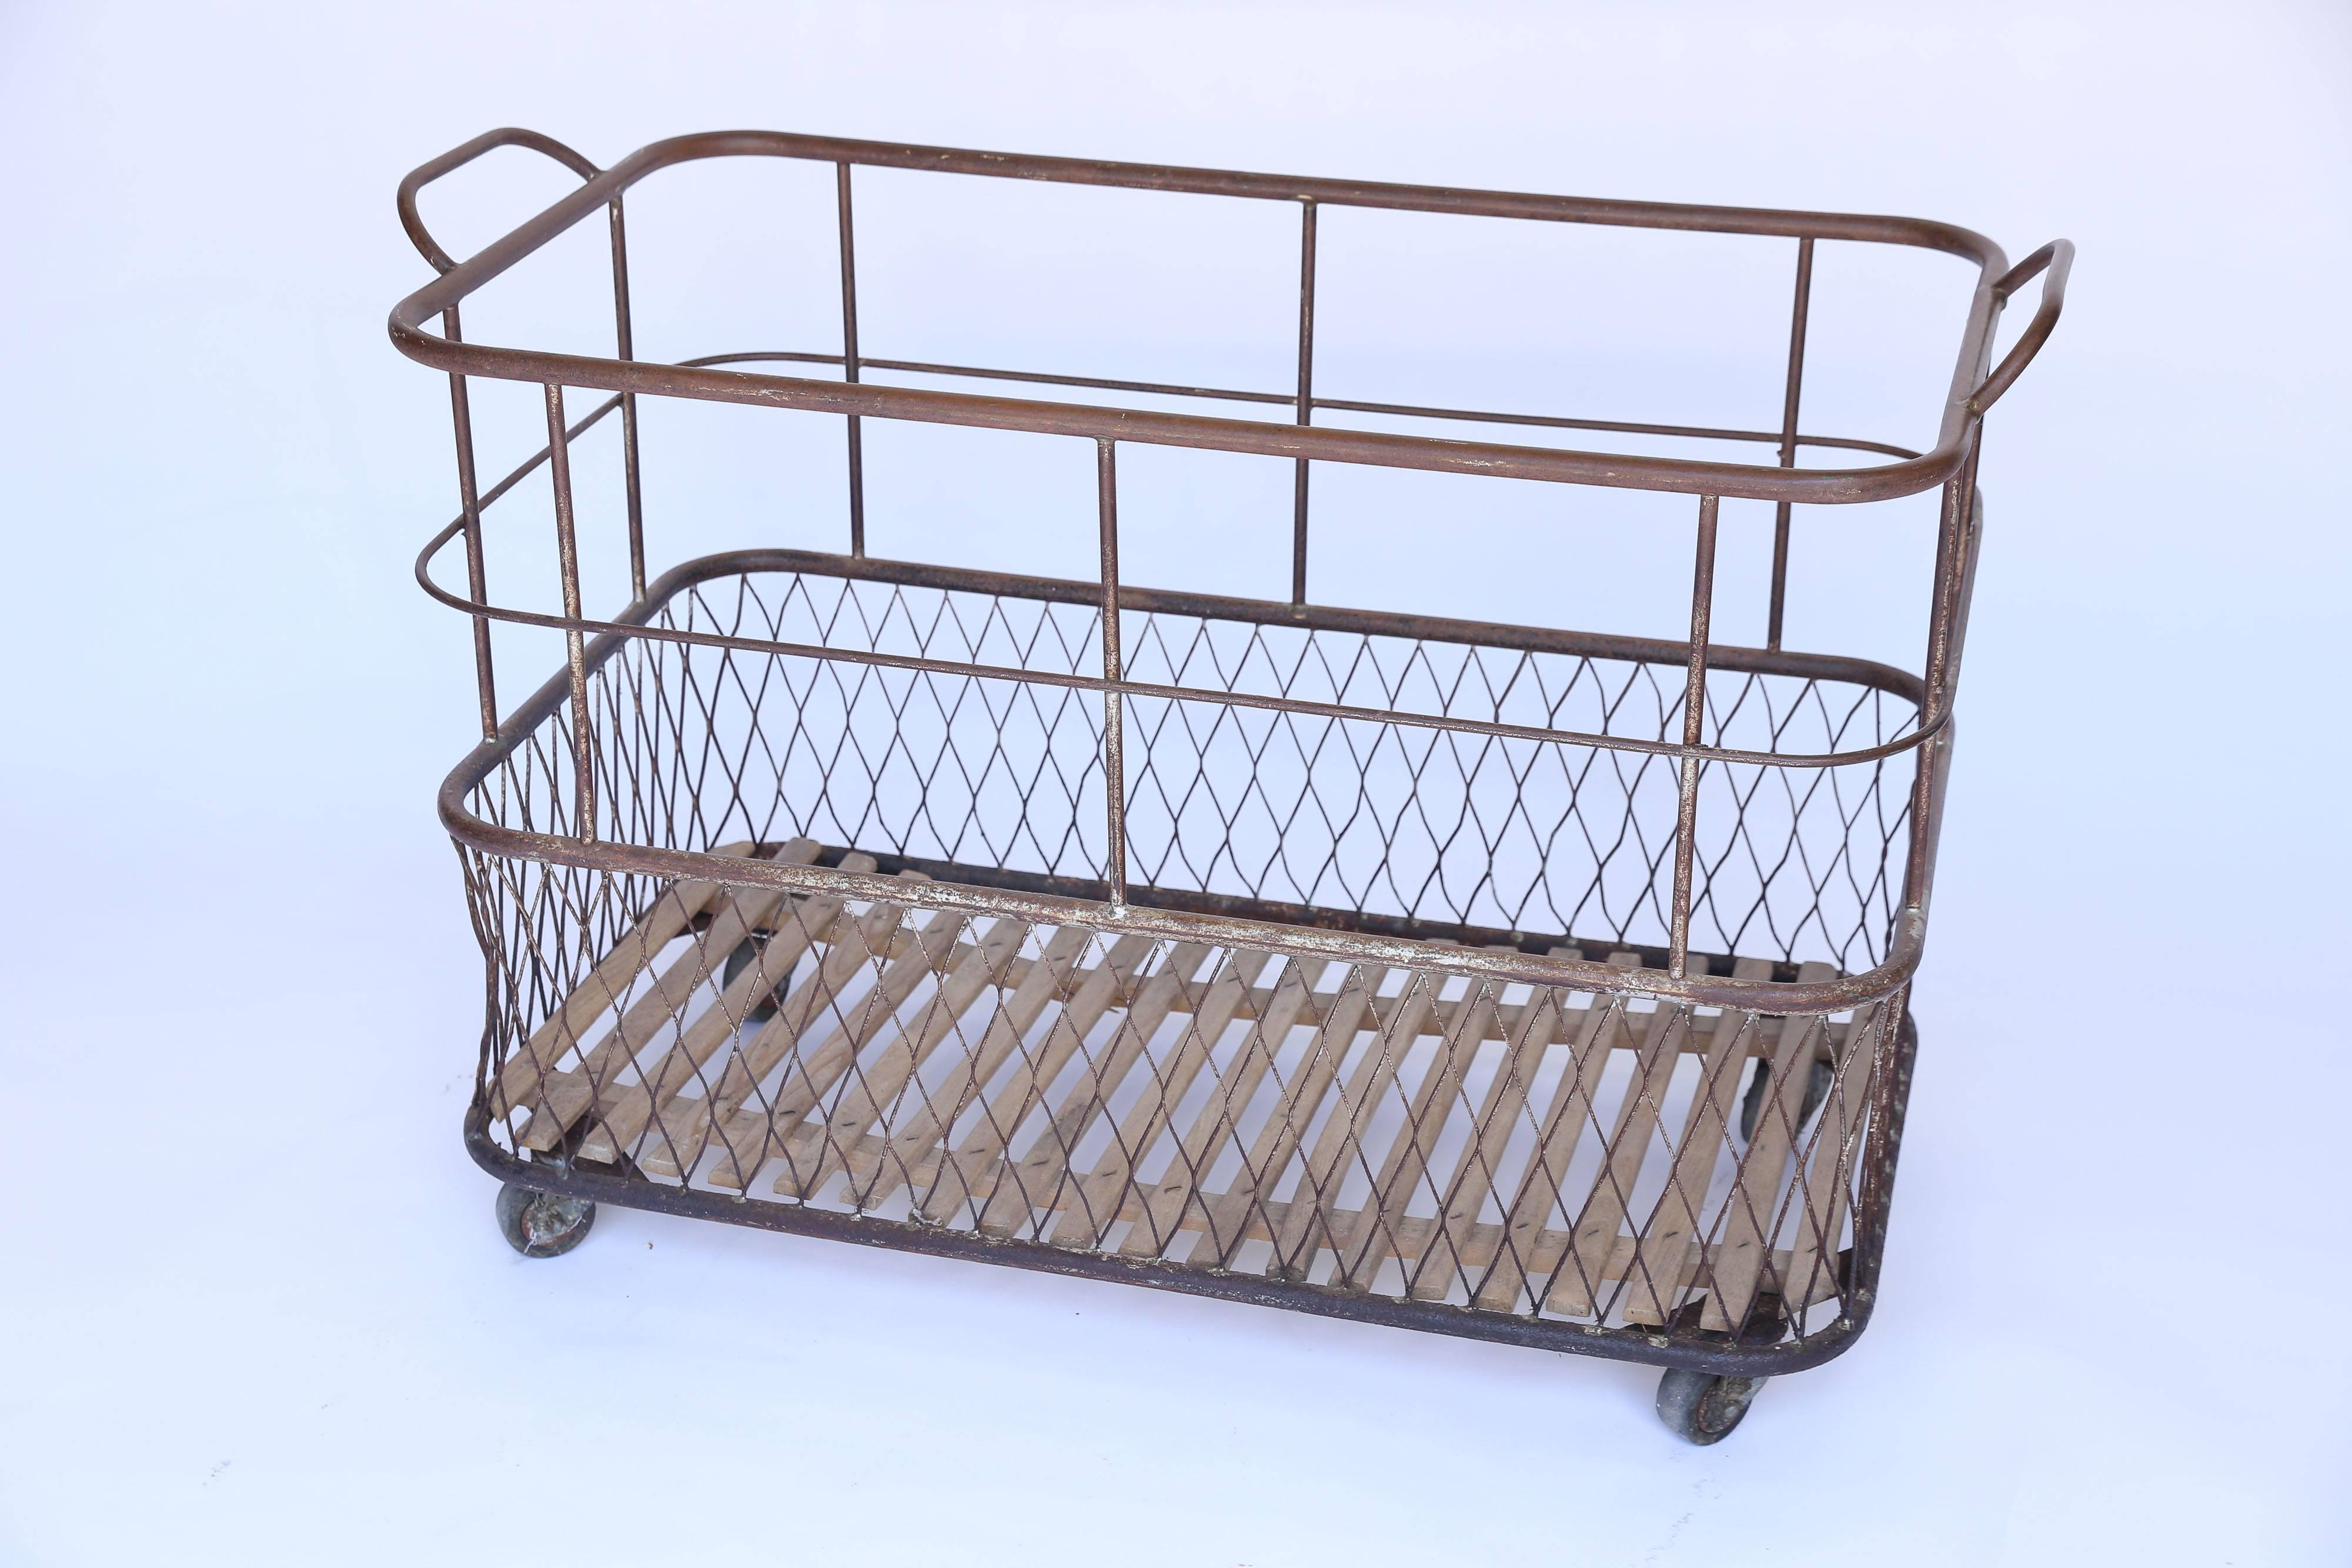 Used for storing and transporting textiles in the mills of France, a metal, wood, and wire linen cart on wheels. Great for storage.